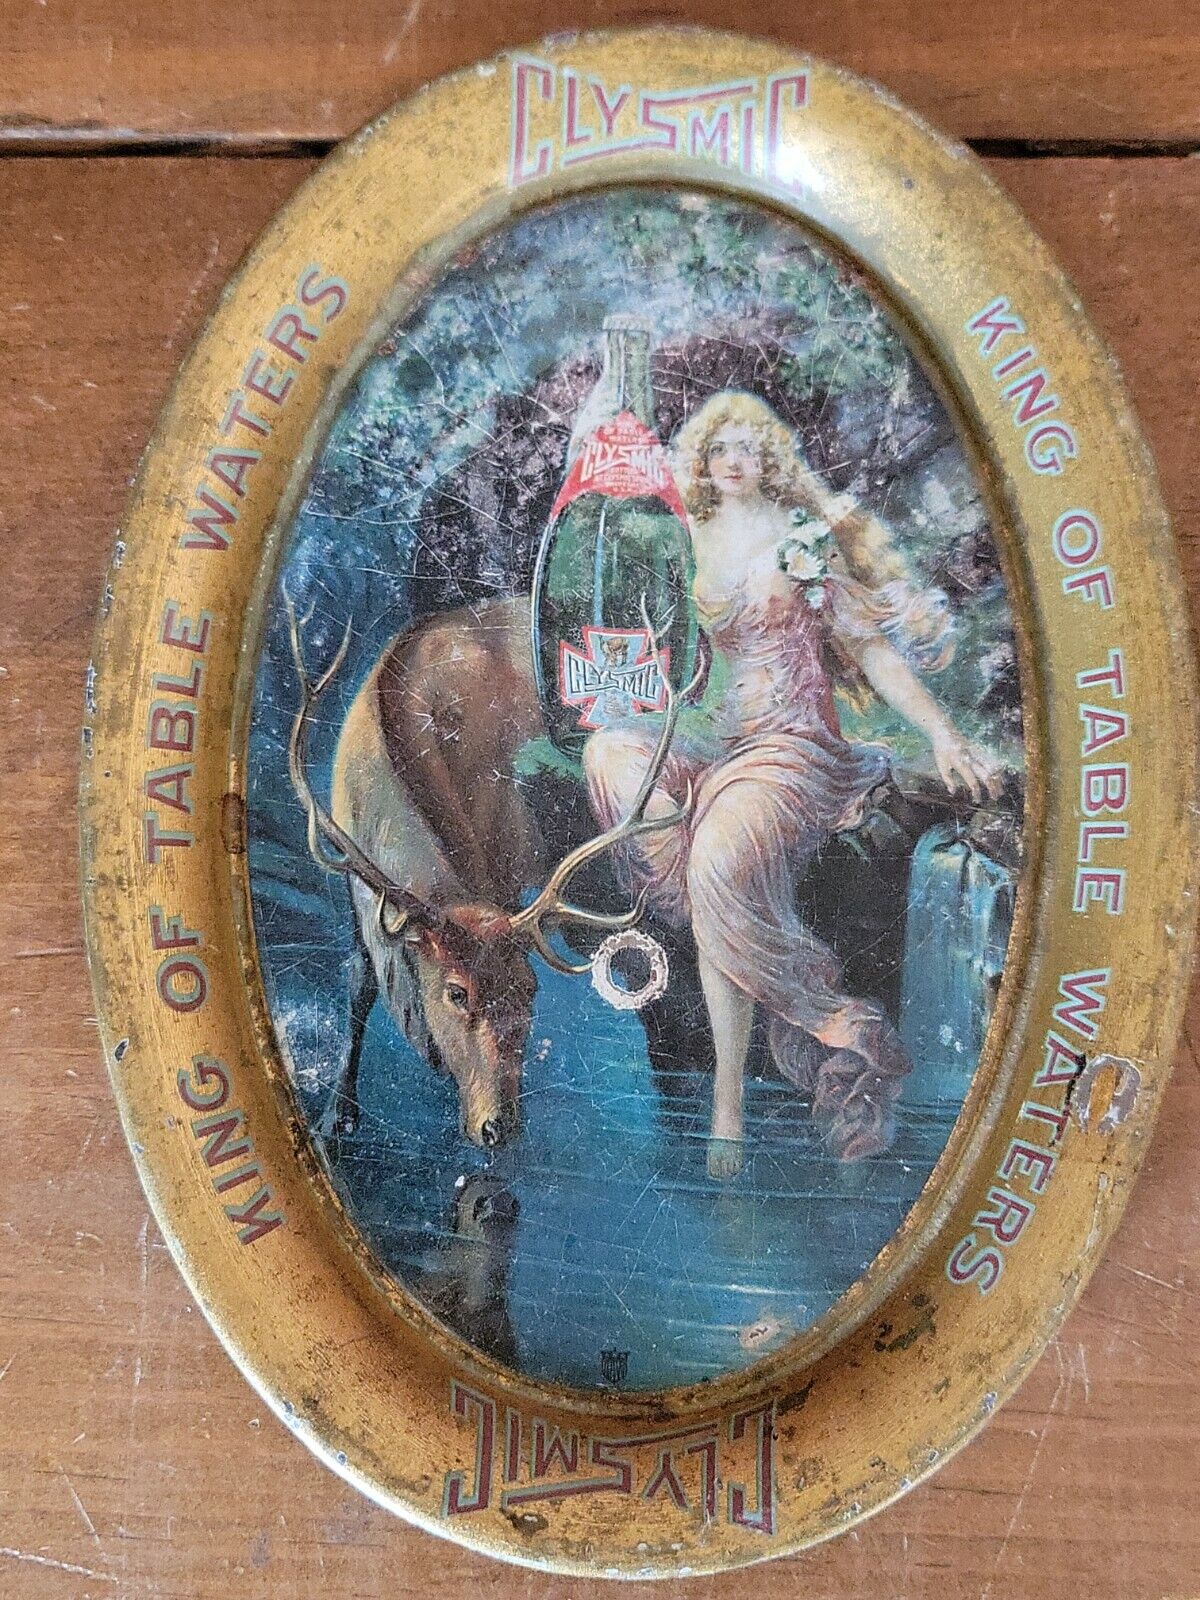 ca1907 CLYSMIC SPARKLING SODA WATER TIN LITHOGRAPH TIP TRAY WITH SEMI-NUDE WOMAN